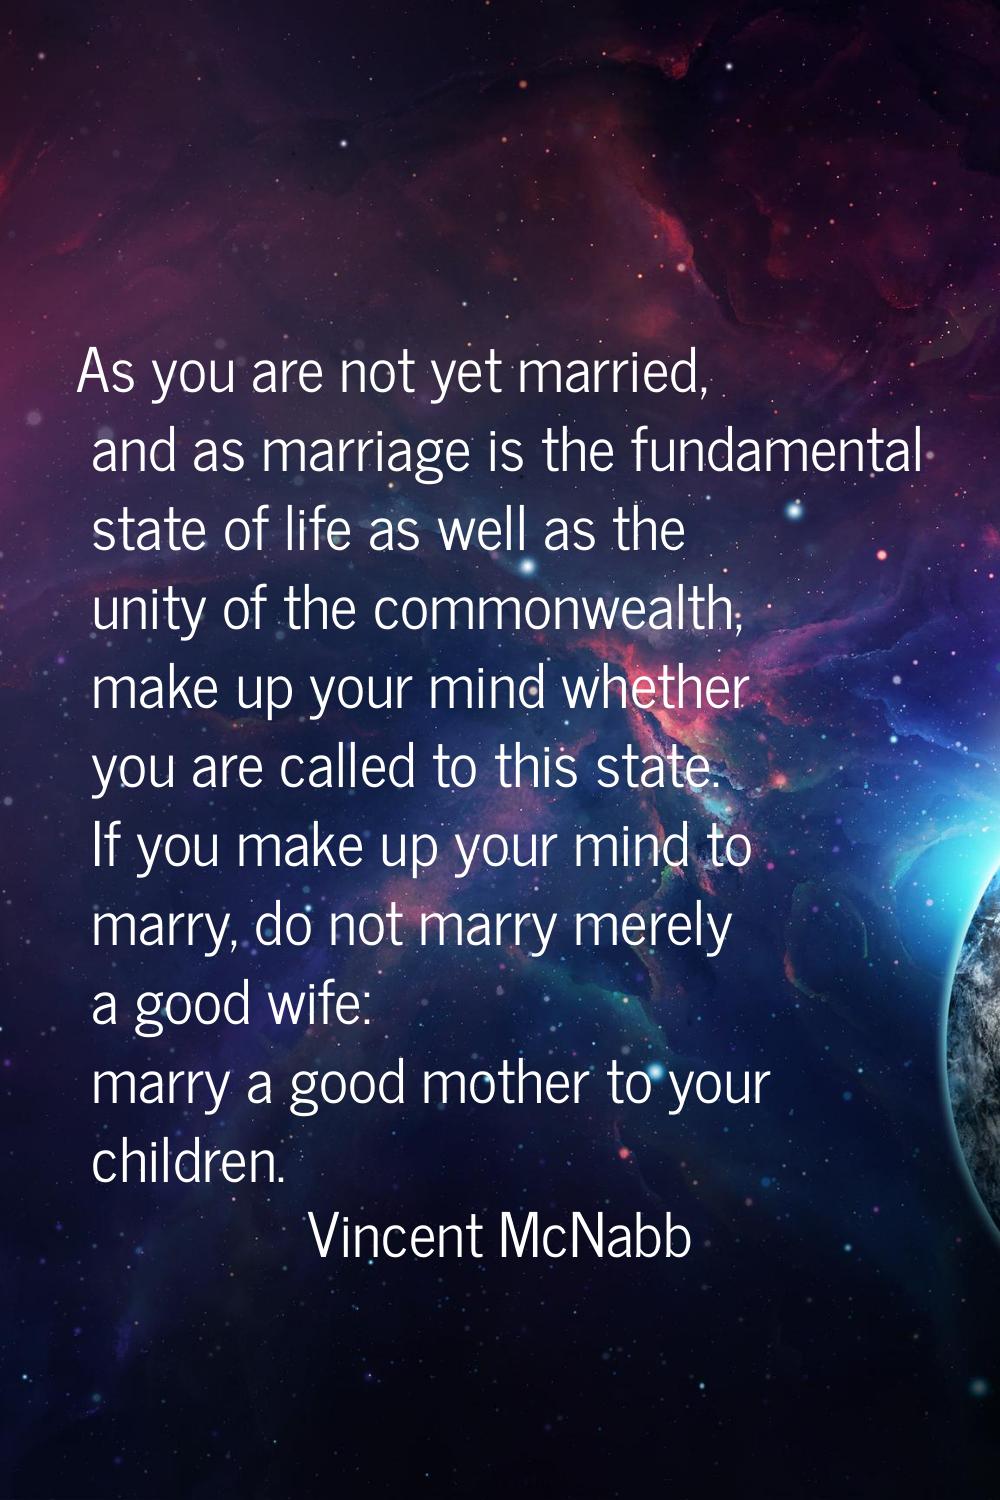 As you are not yet married, and as marriage is the fundamental state of life as well as the unity o